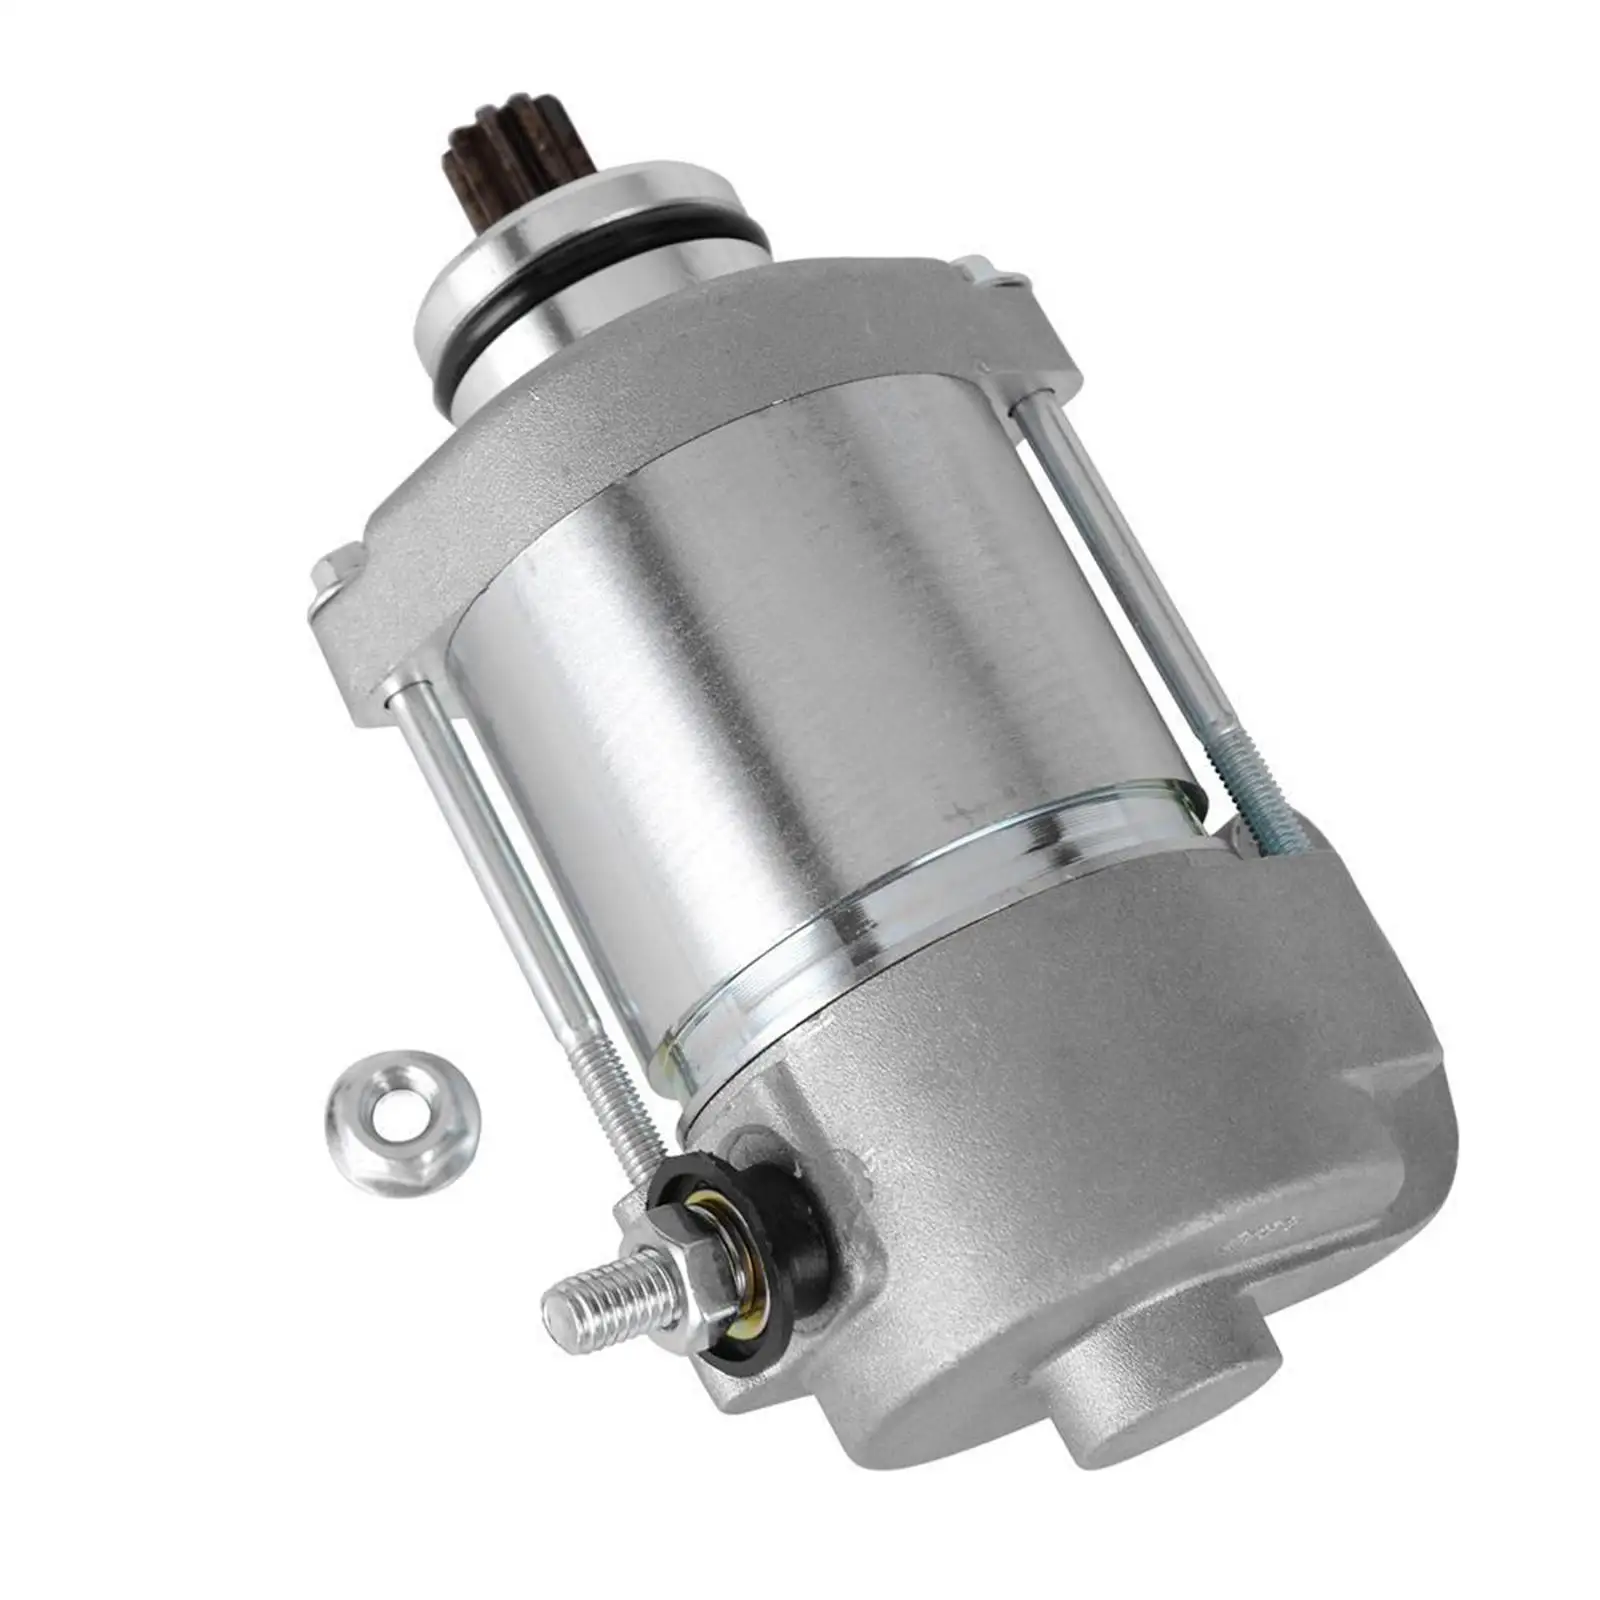 Starter Motor Accessory High Quality 55140001000 for 200 250